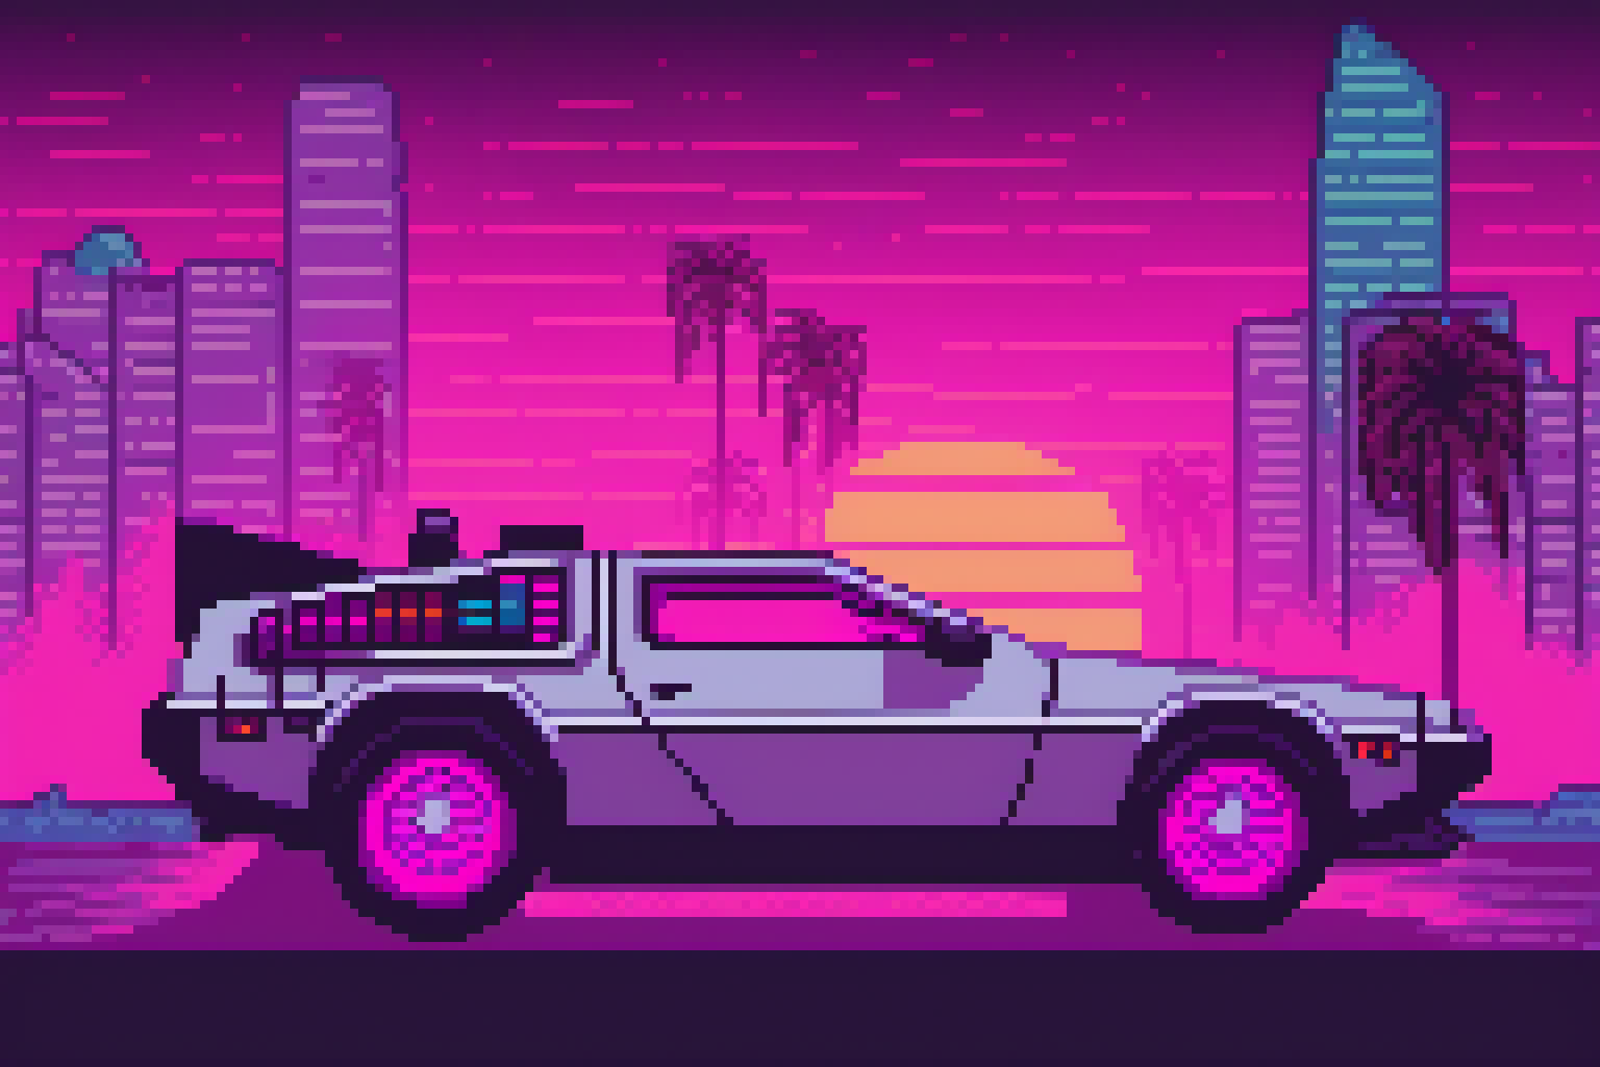 A purple car with a DeLorean design in front of palm trees.